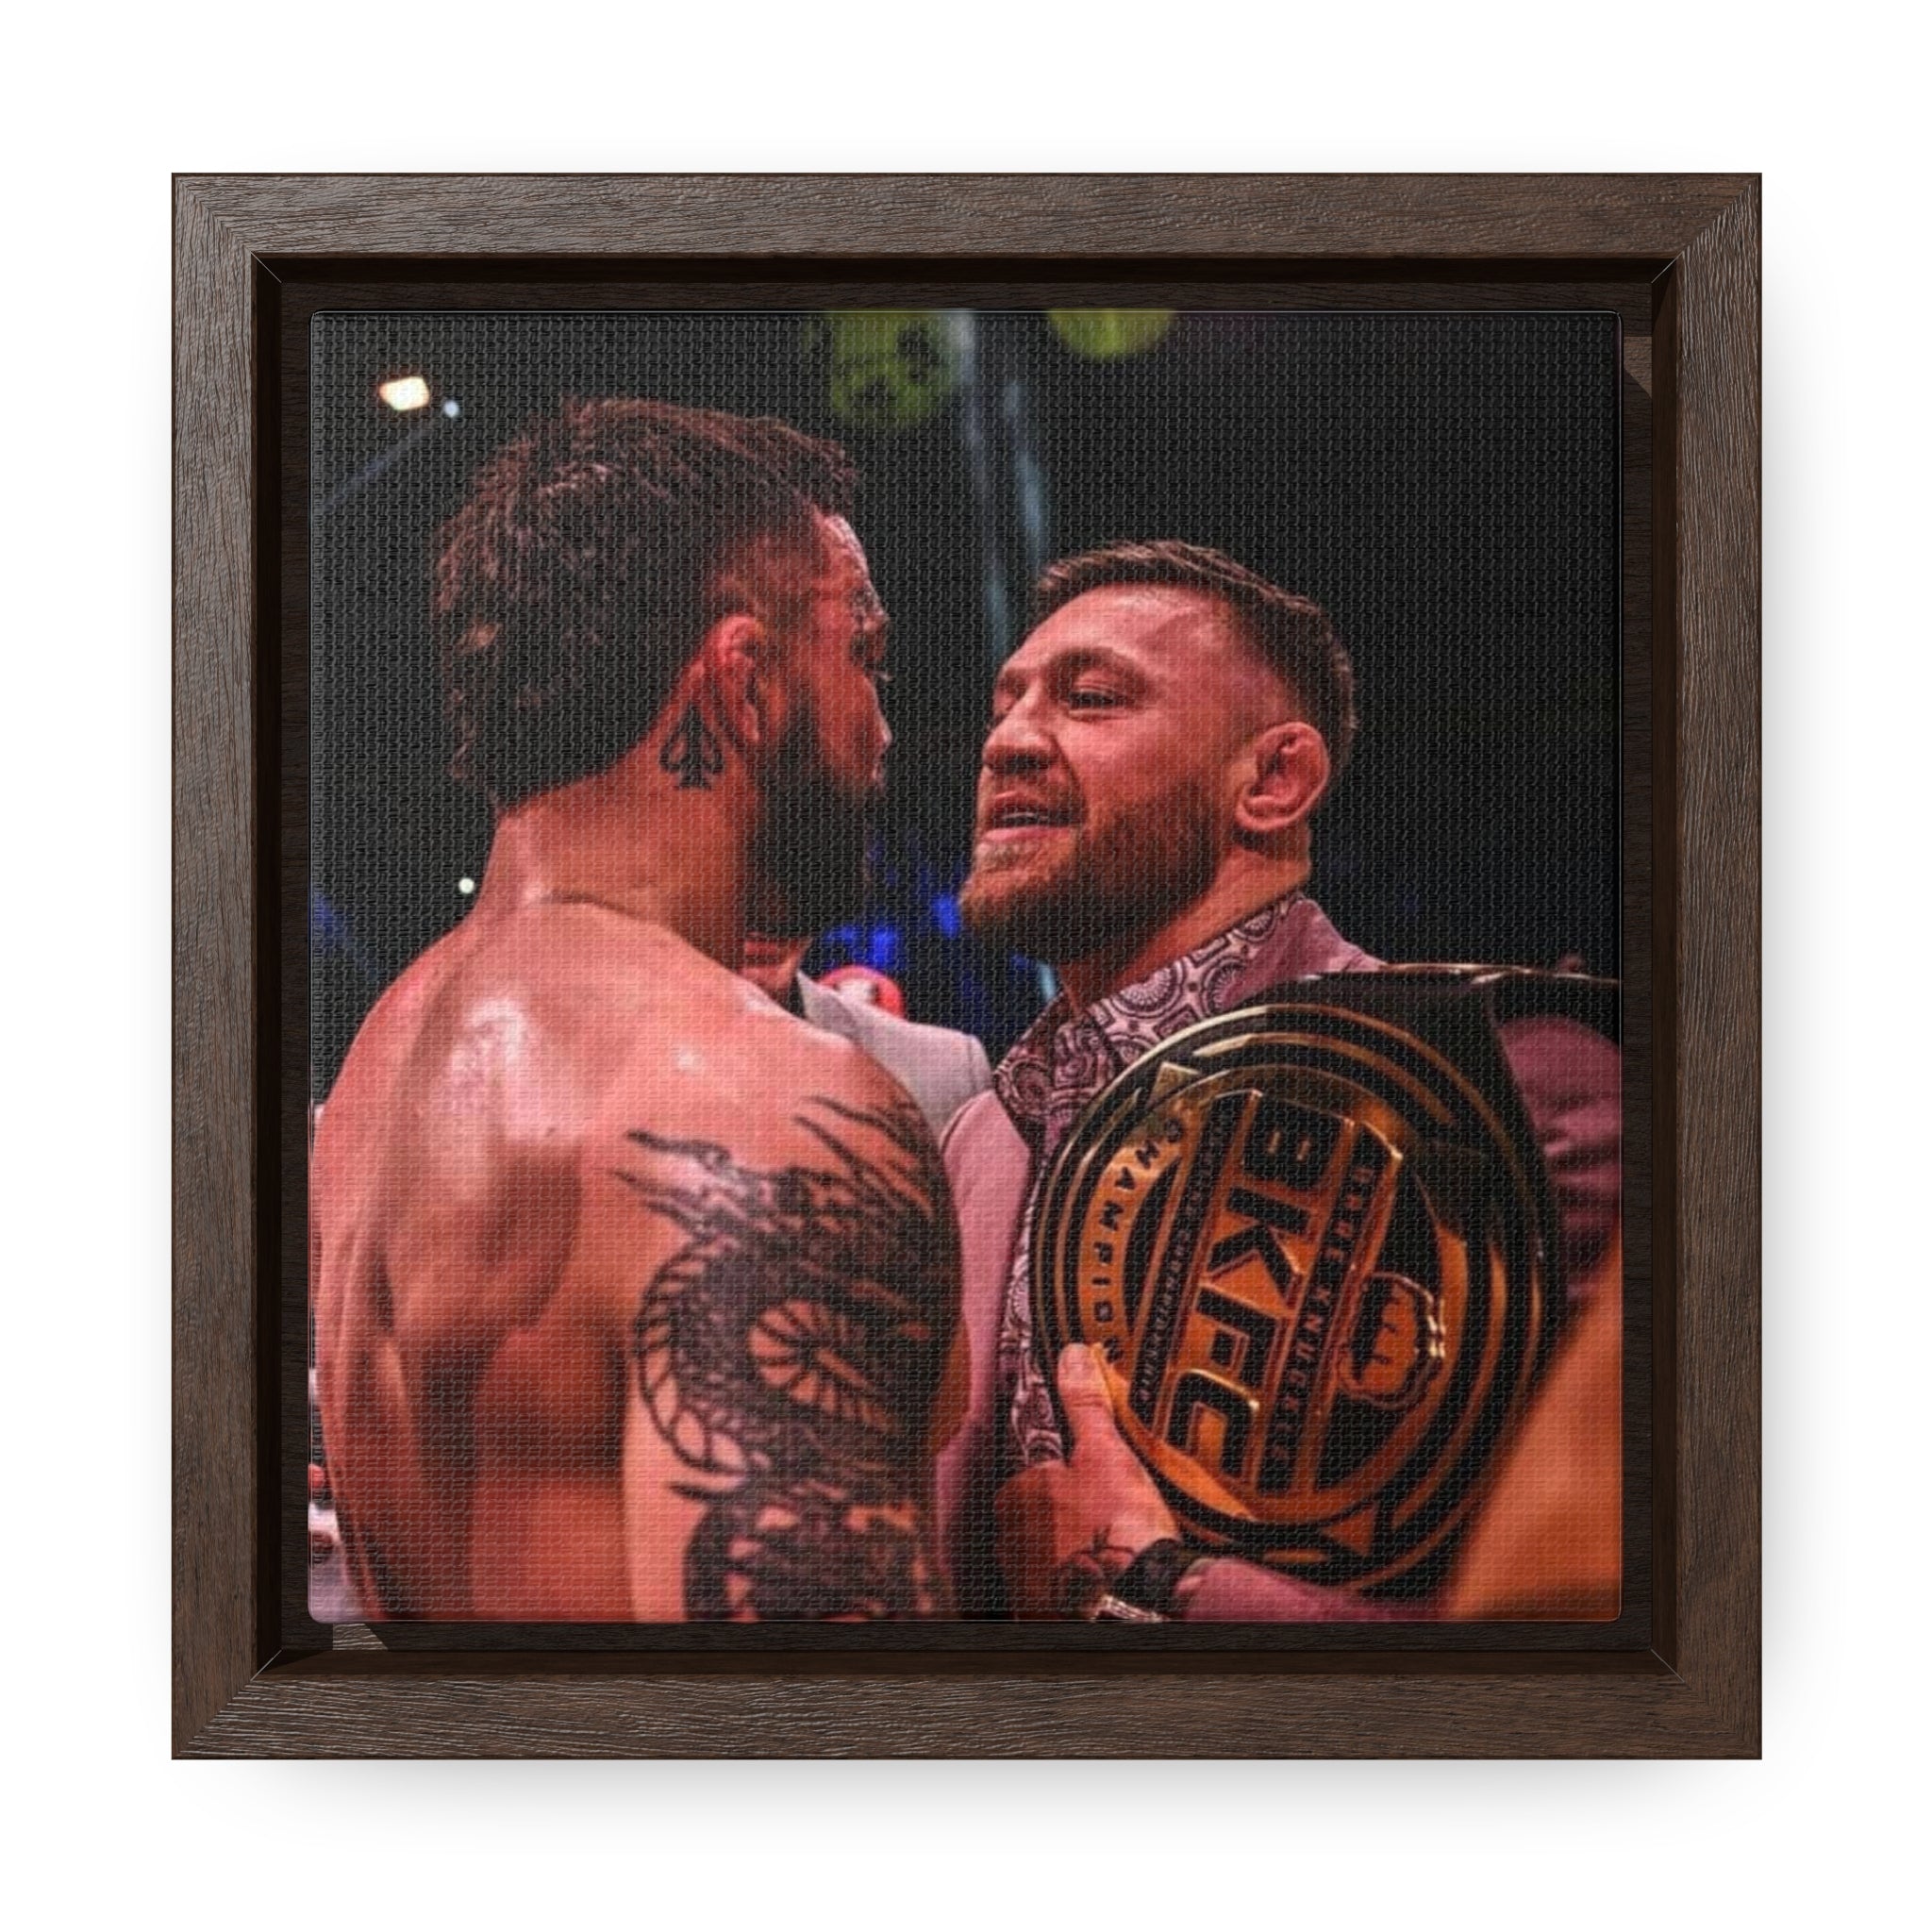 Gallery Canvas Wraps, Square Frame Mike Perry conor McGregor